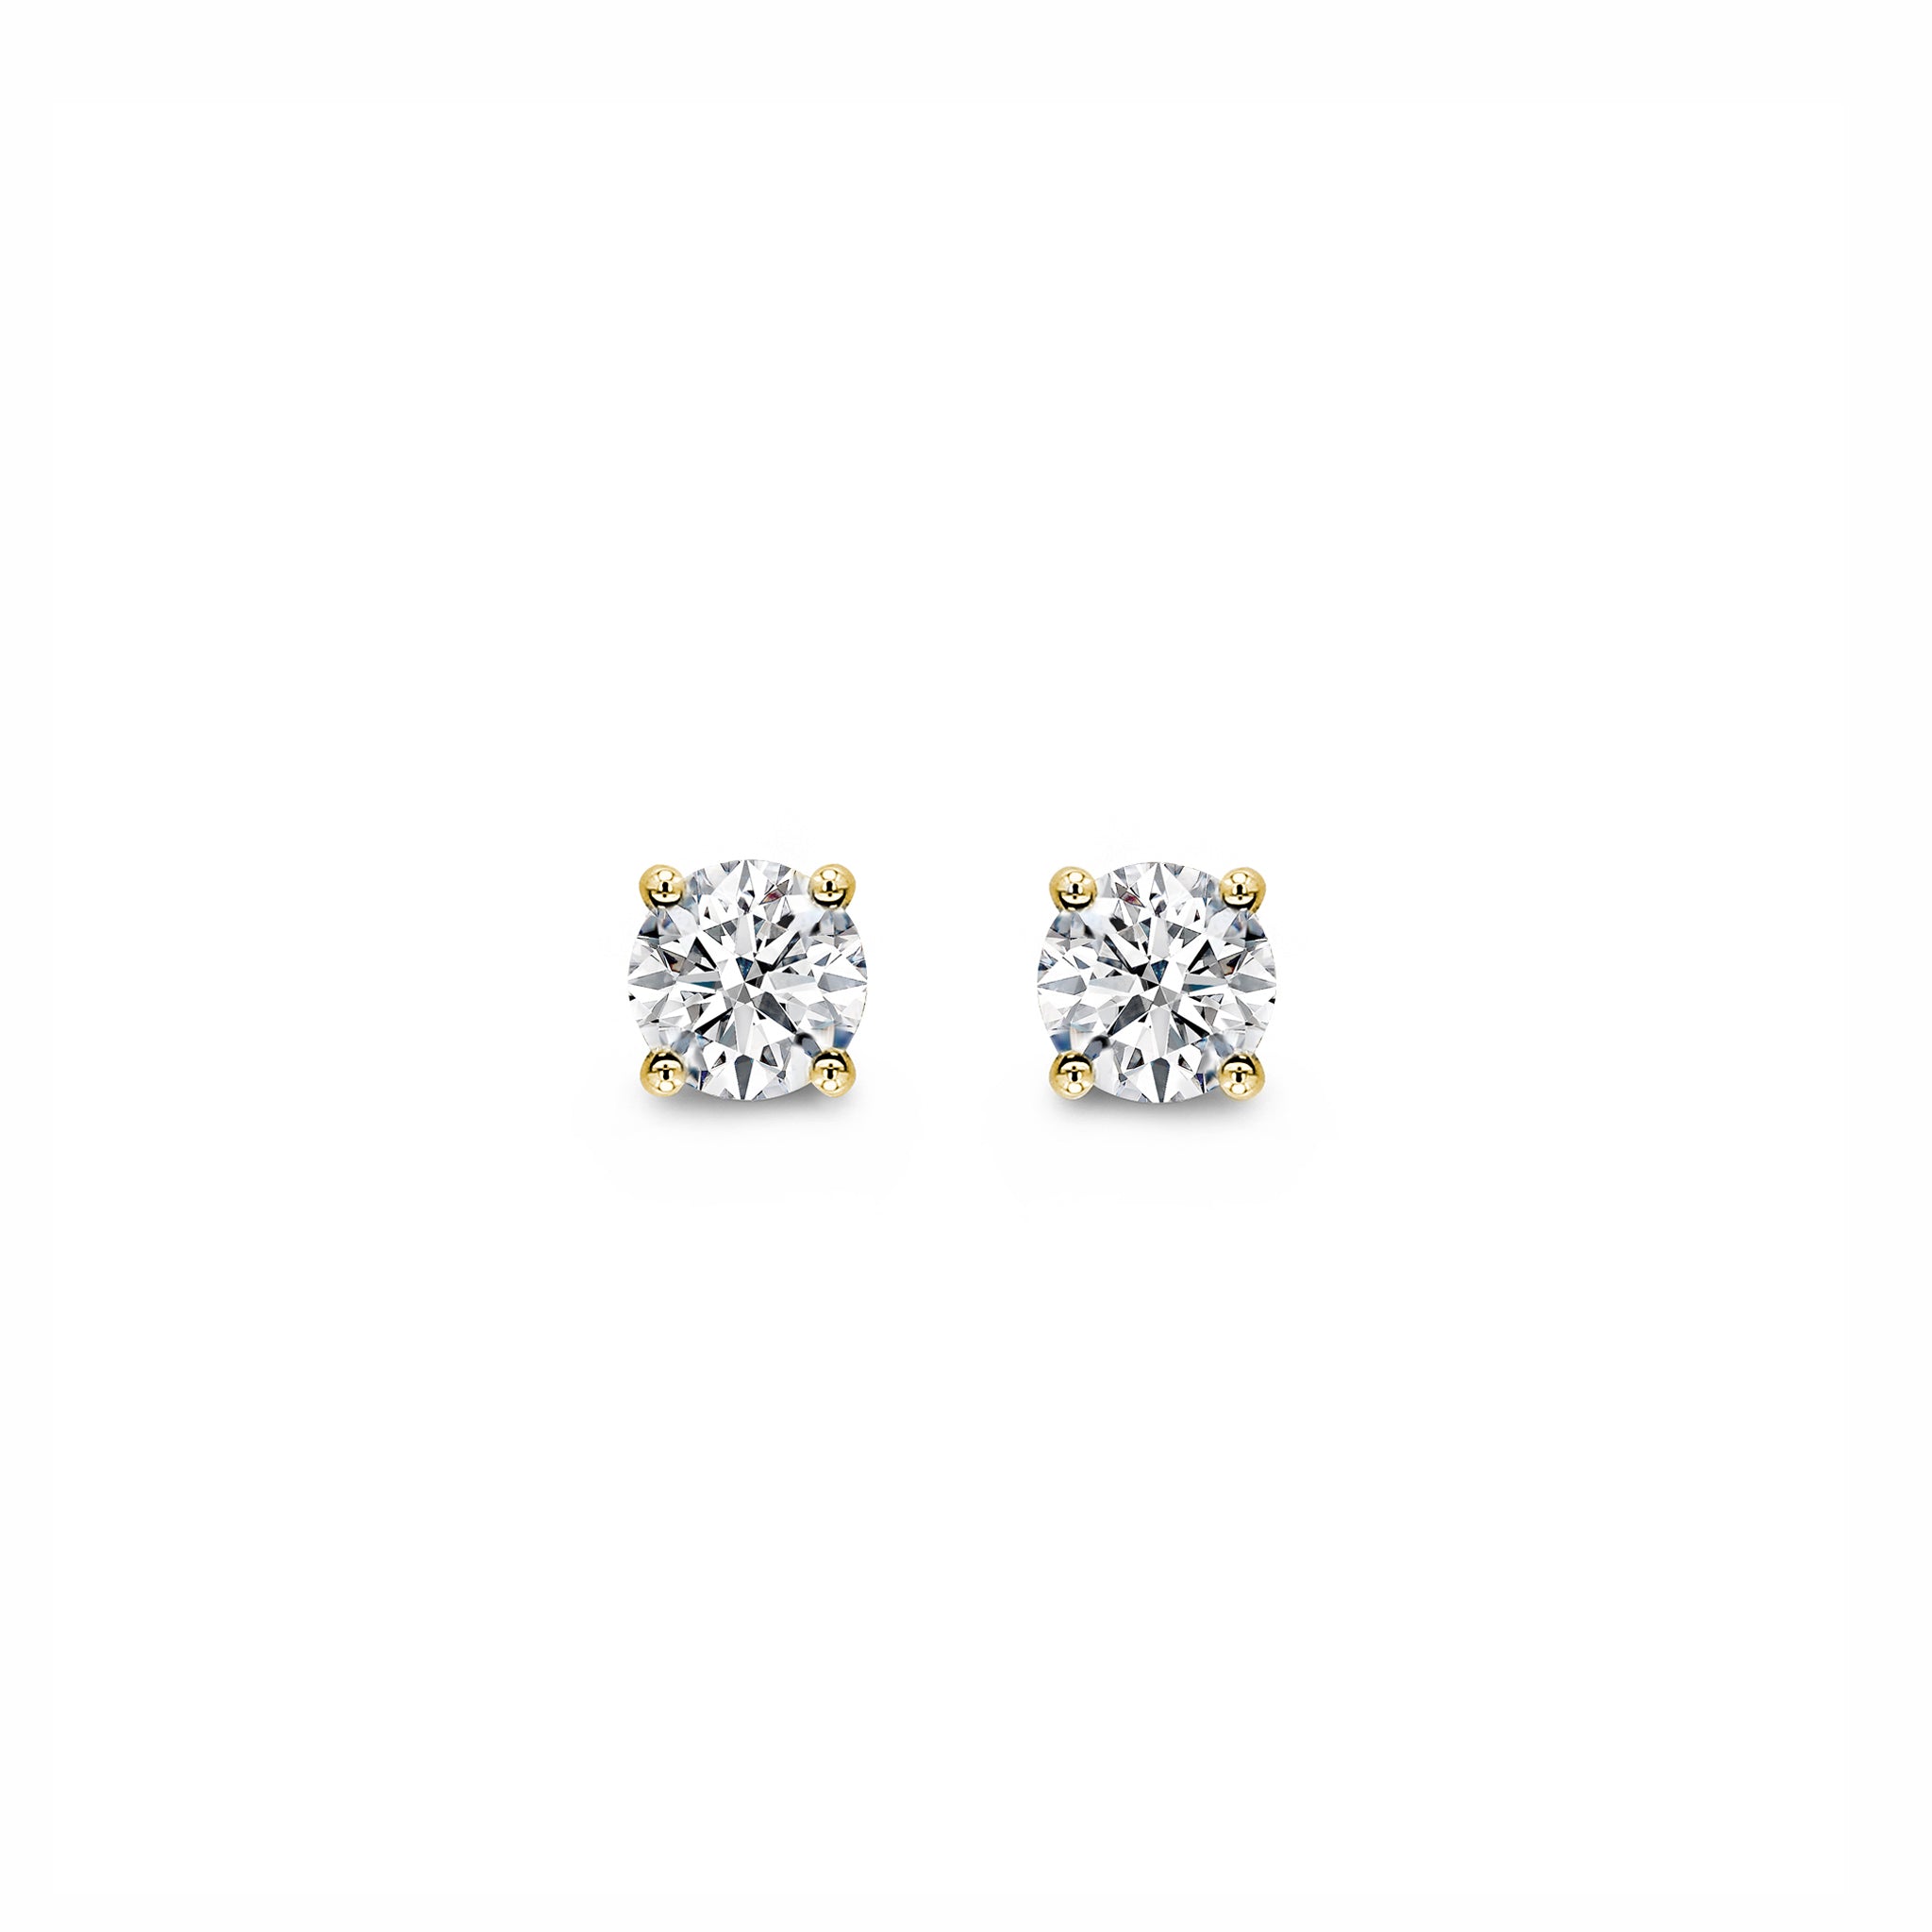 Shimansky - Classic Diamond Solitaire Earrings 0.60ct in 18K Yellow Gold